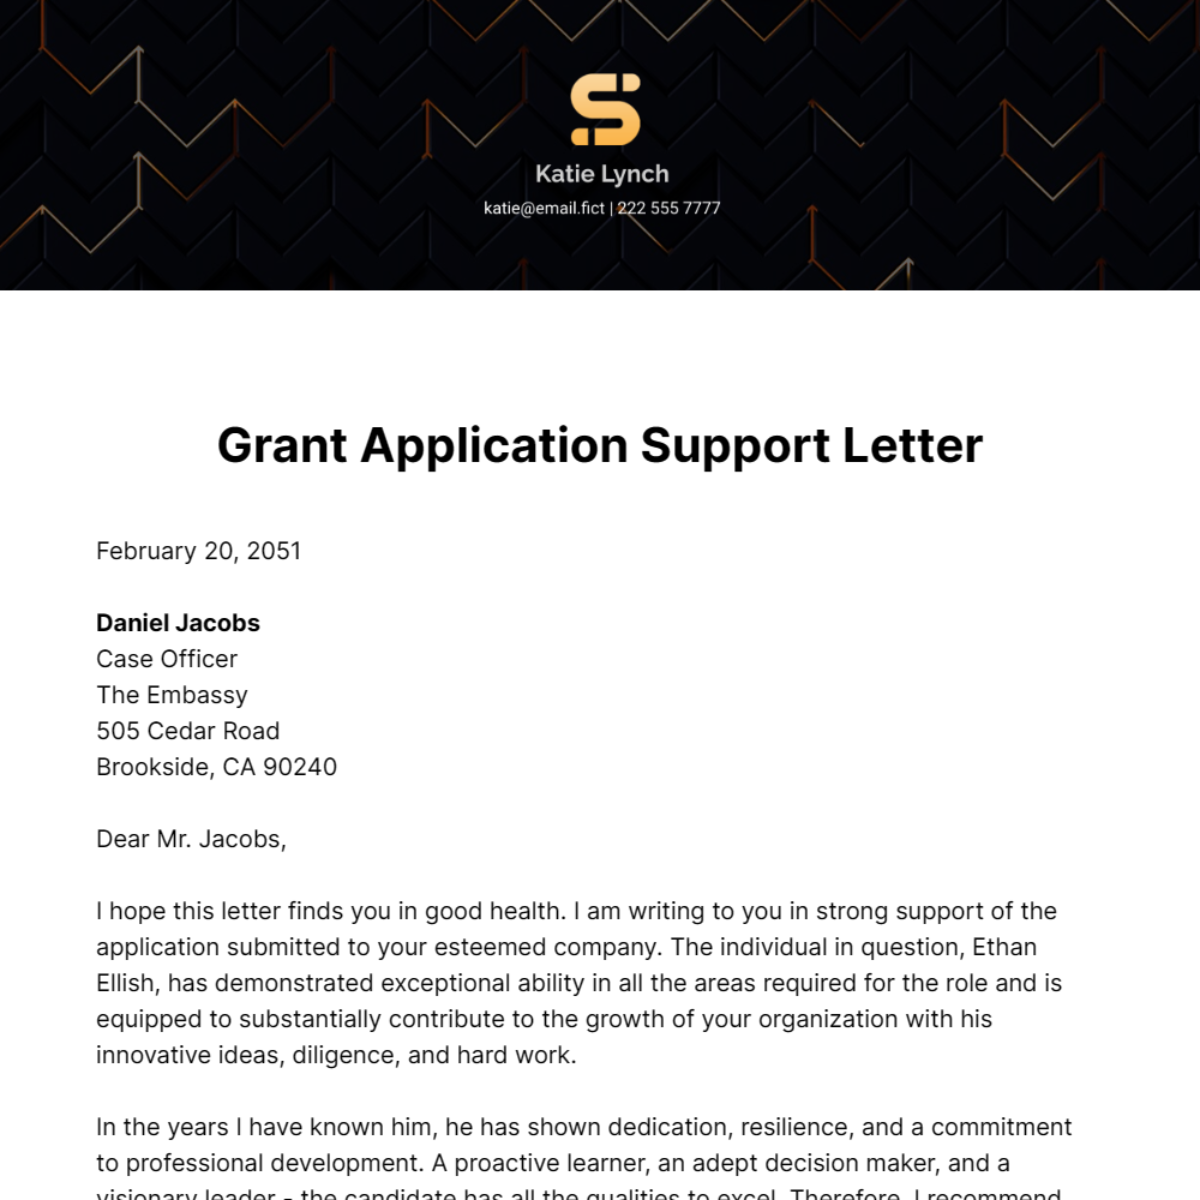 Grant Application Support Letter Template